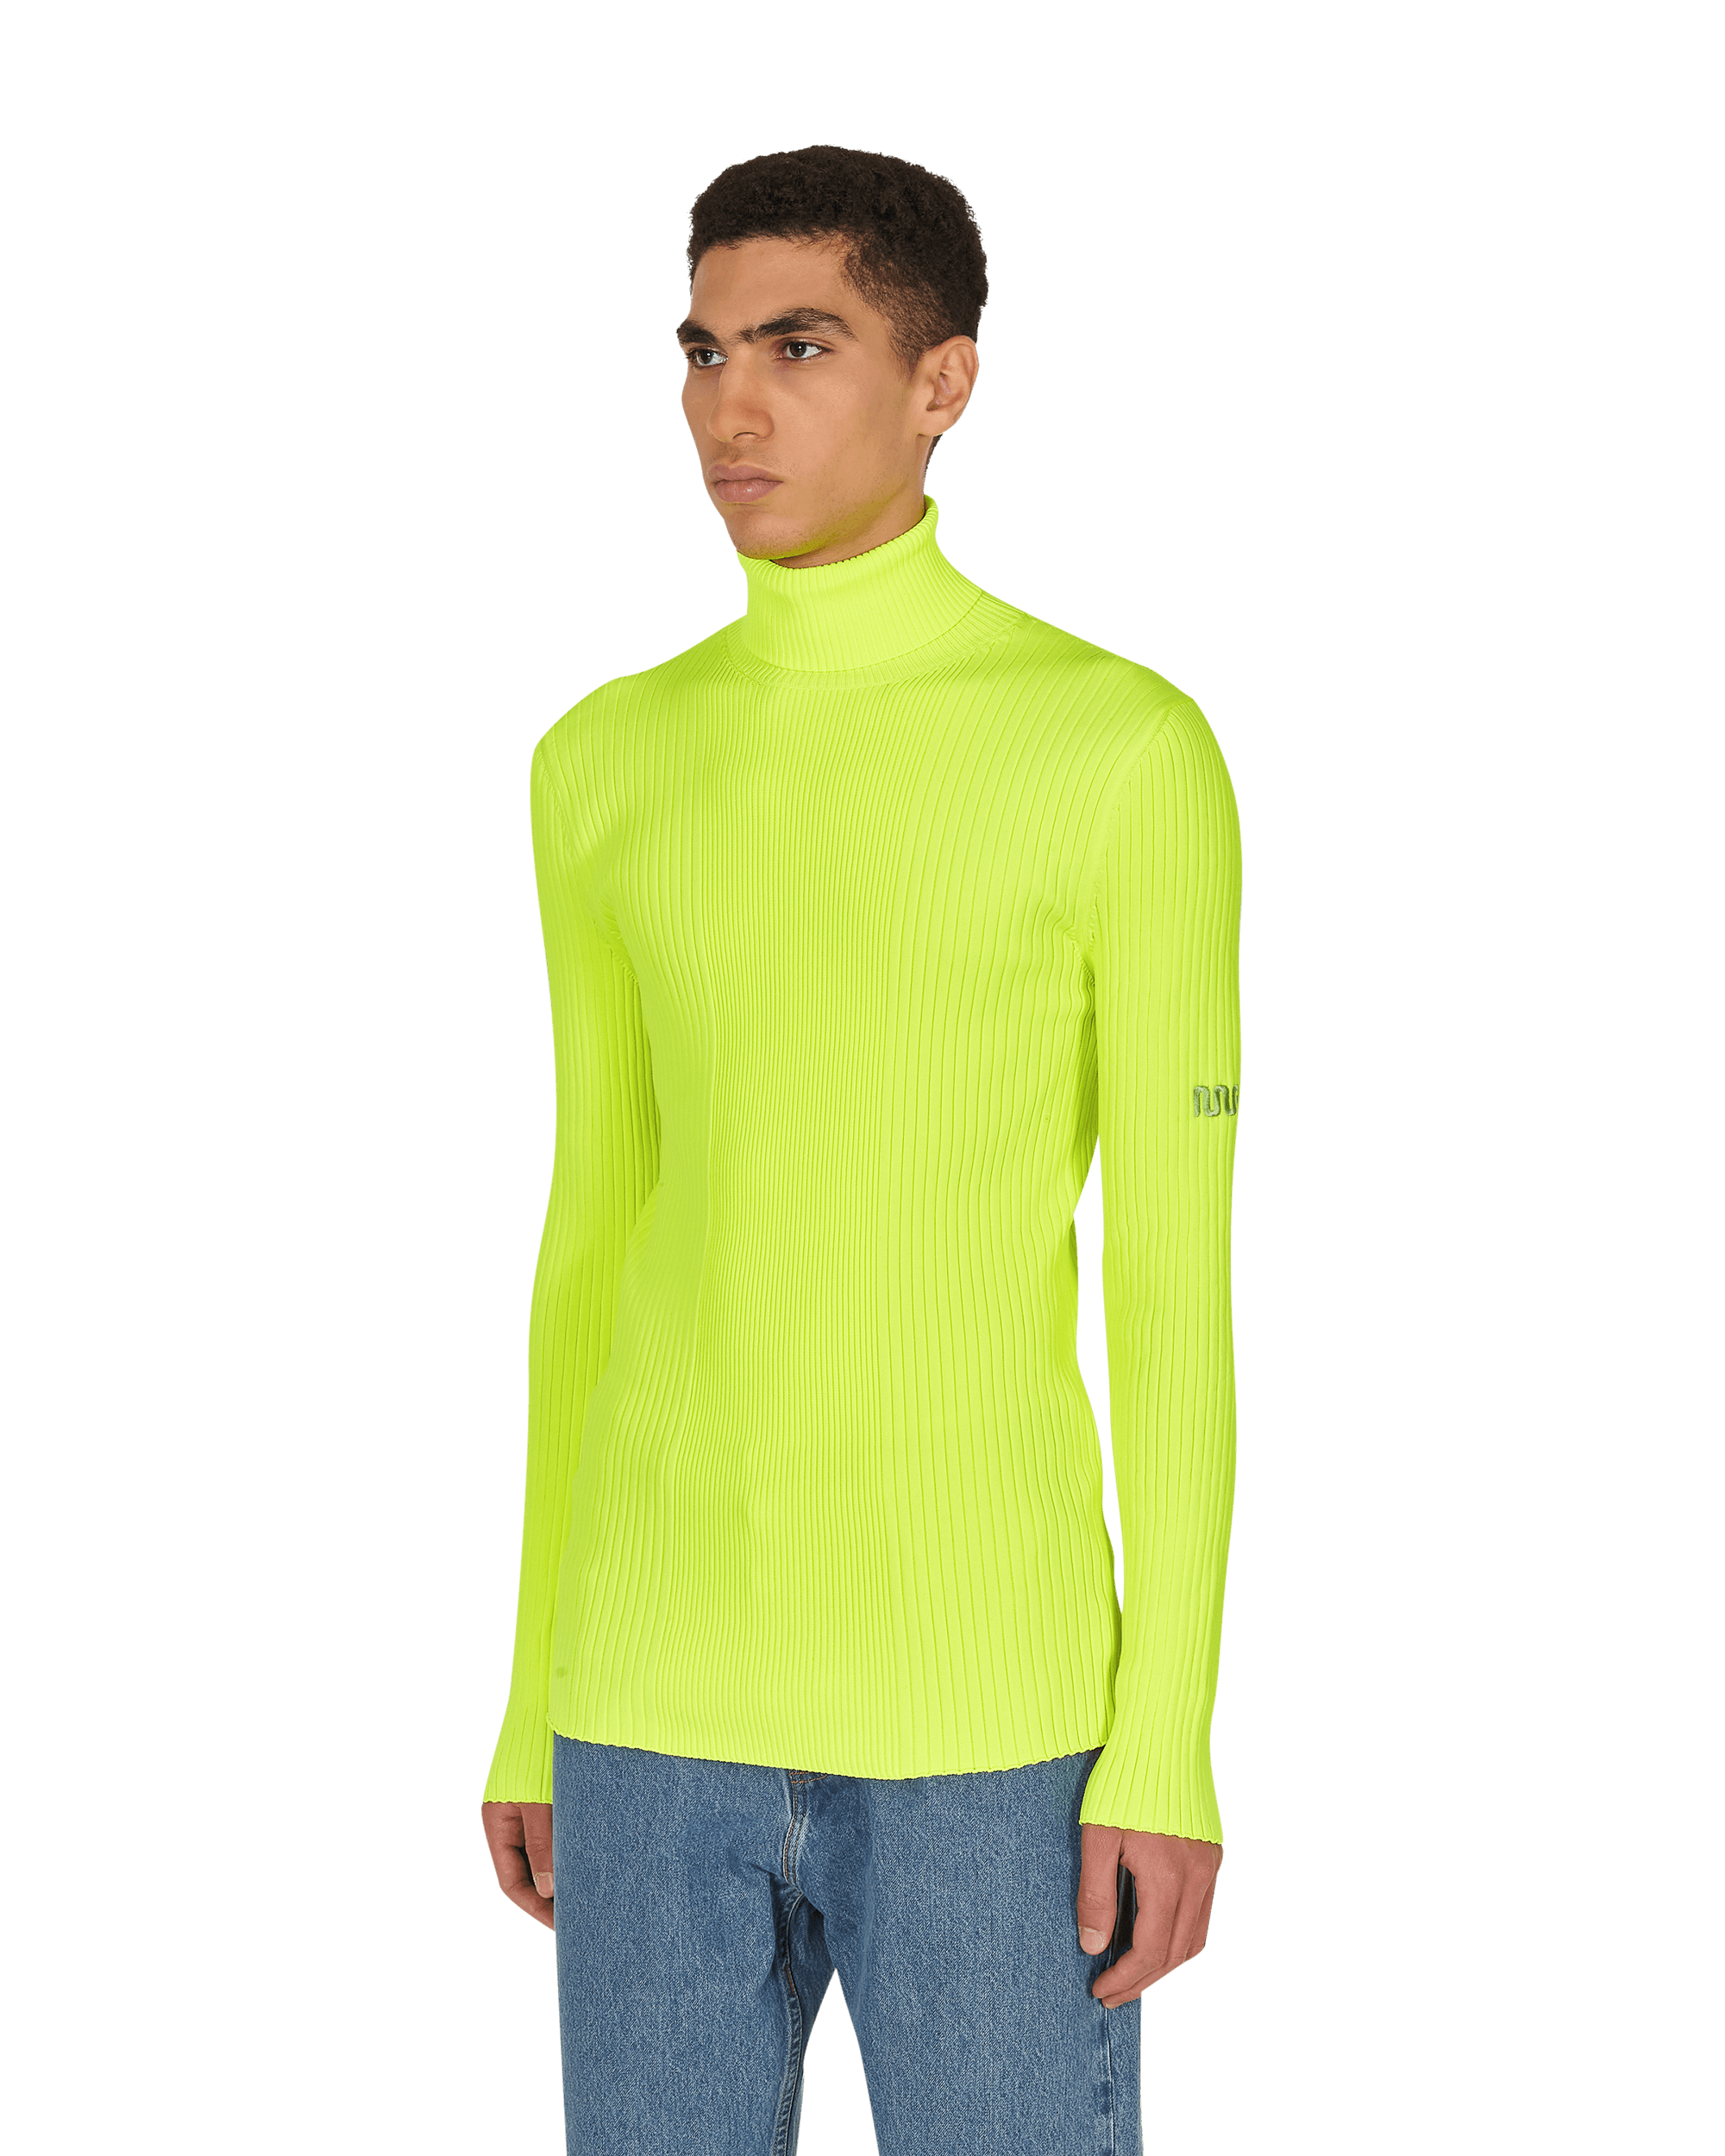 Martine Rose Ribbed Capo Fluo Yellow Knitwears Turtleneck M926KW MR023